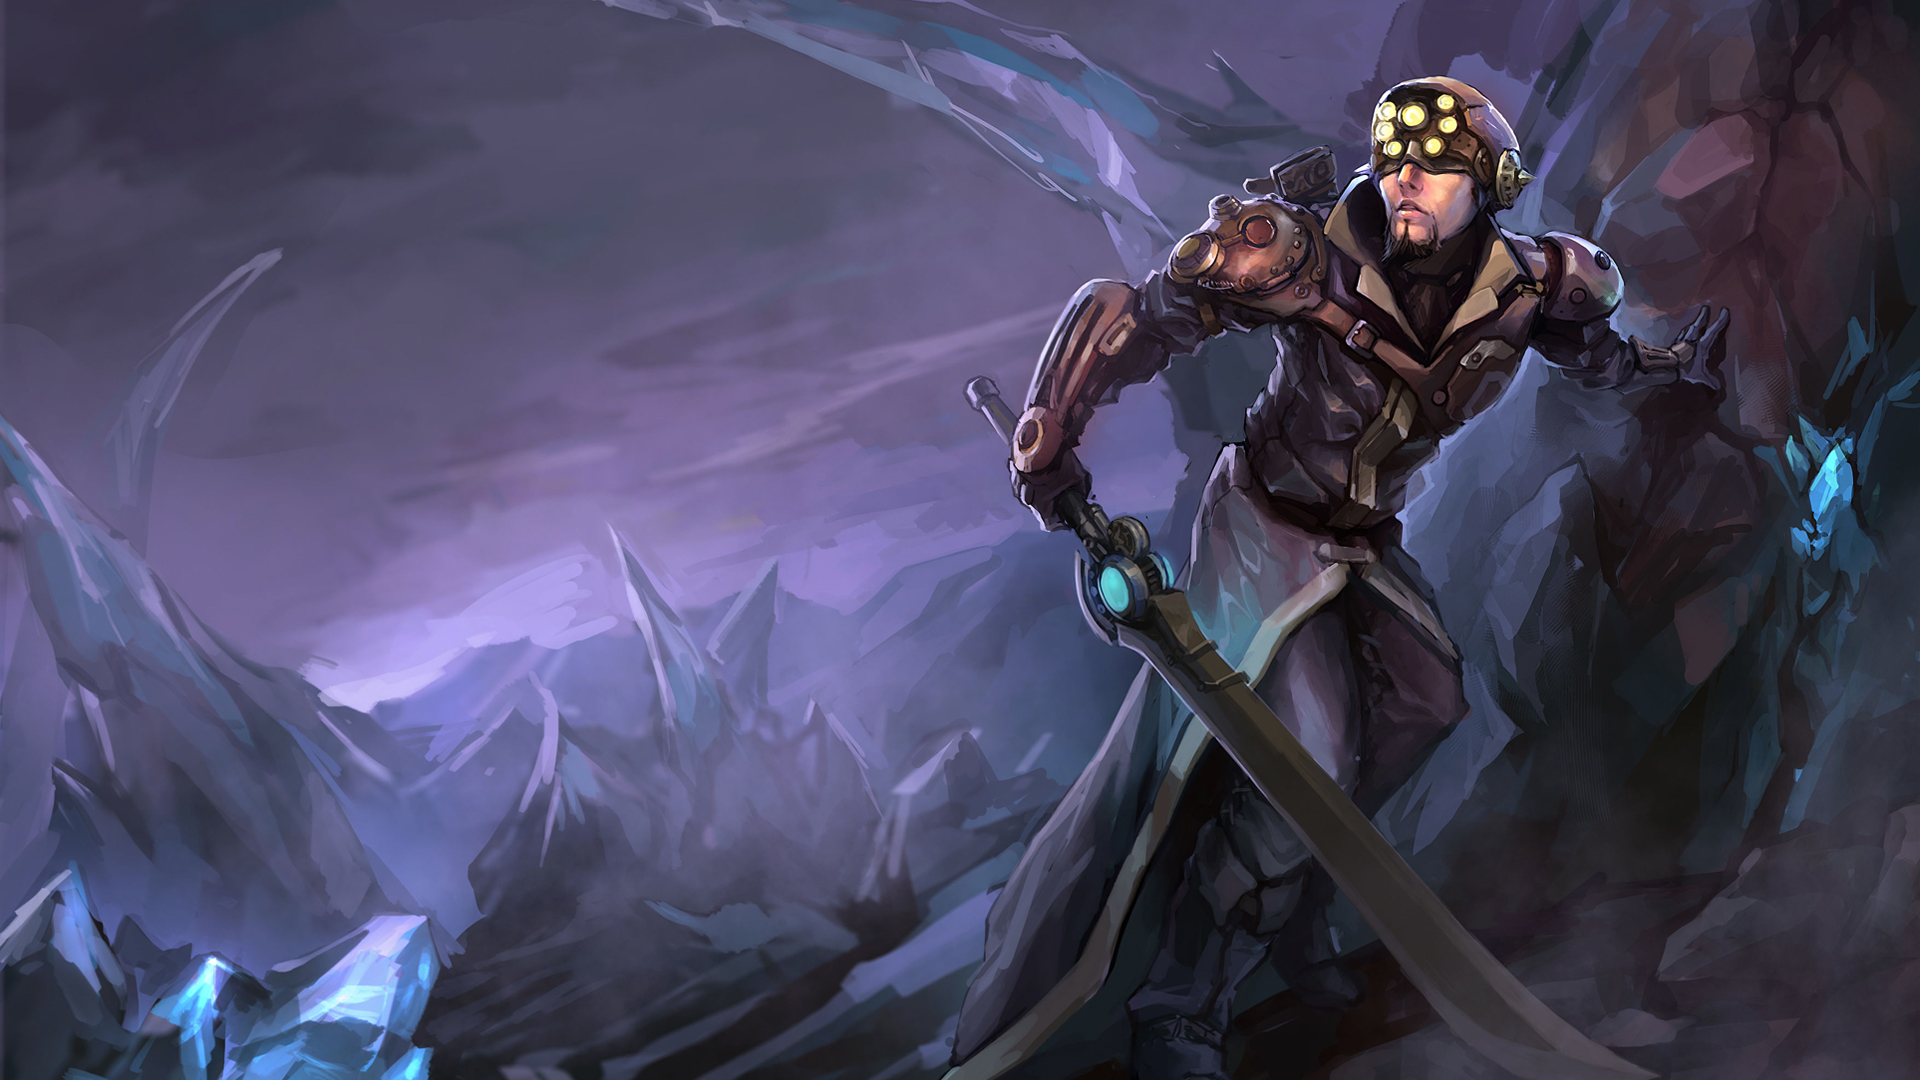 master yi league of legends champion lol game hd 1920x1080 1080p and 1920x1080